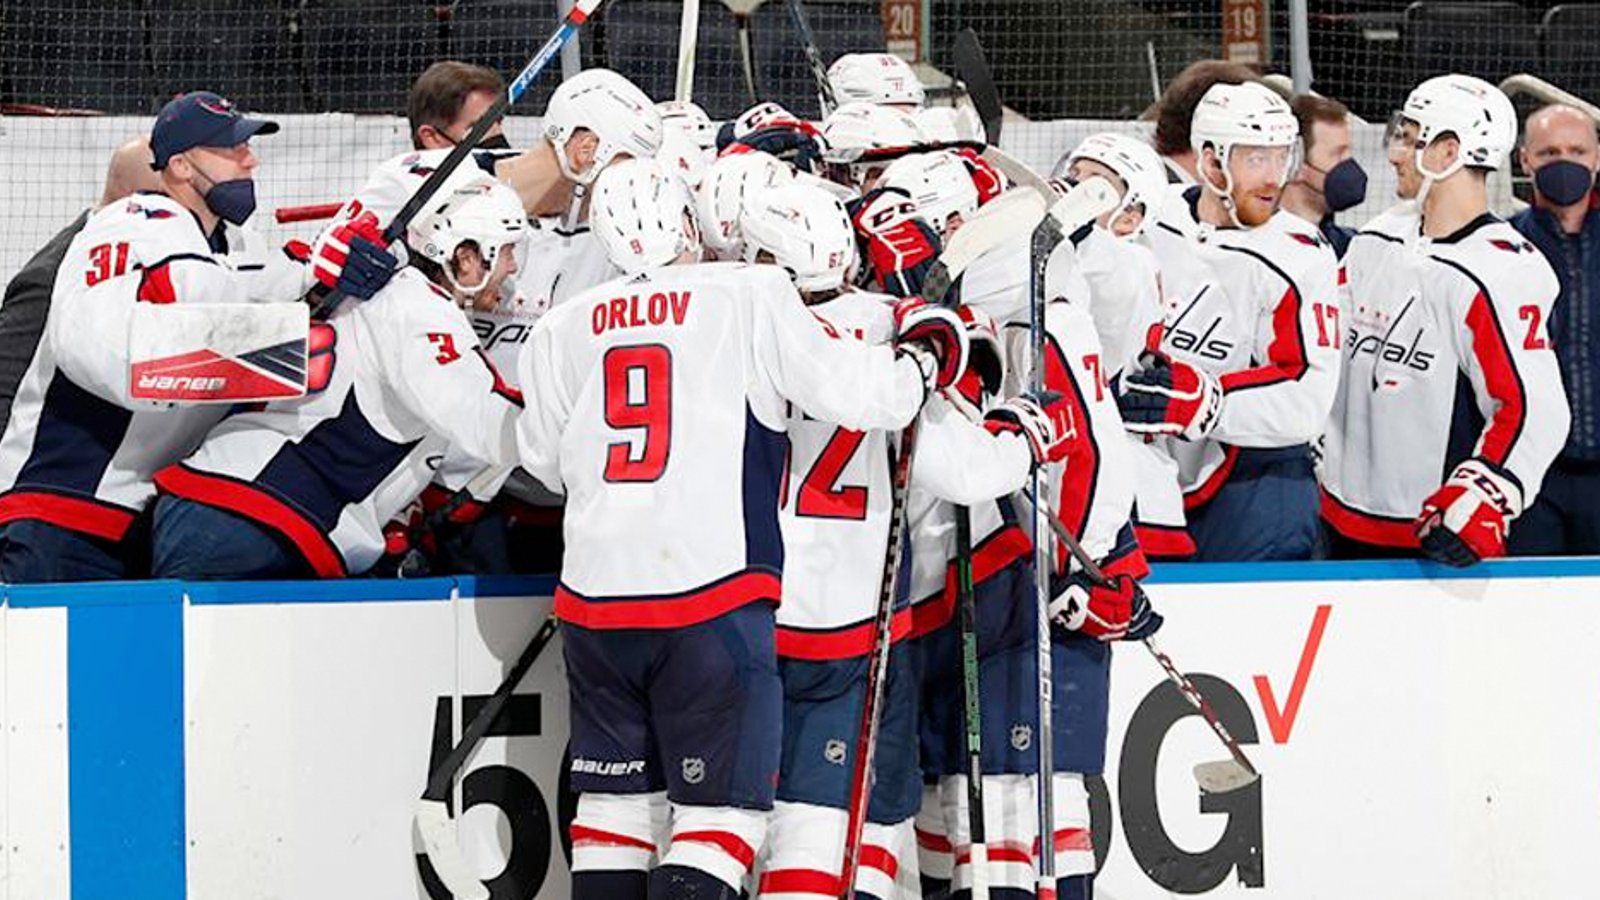 Oshie's teammates mob him after he scores hat trick goal in his first game back after his father's death